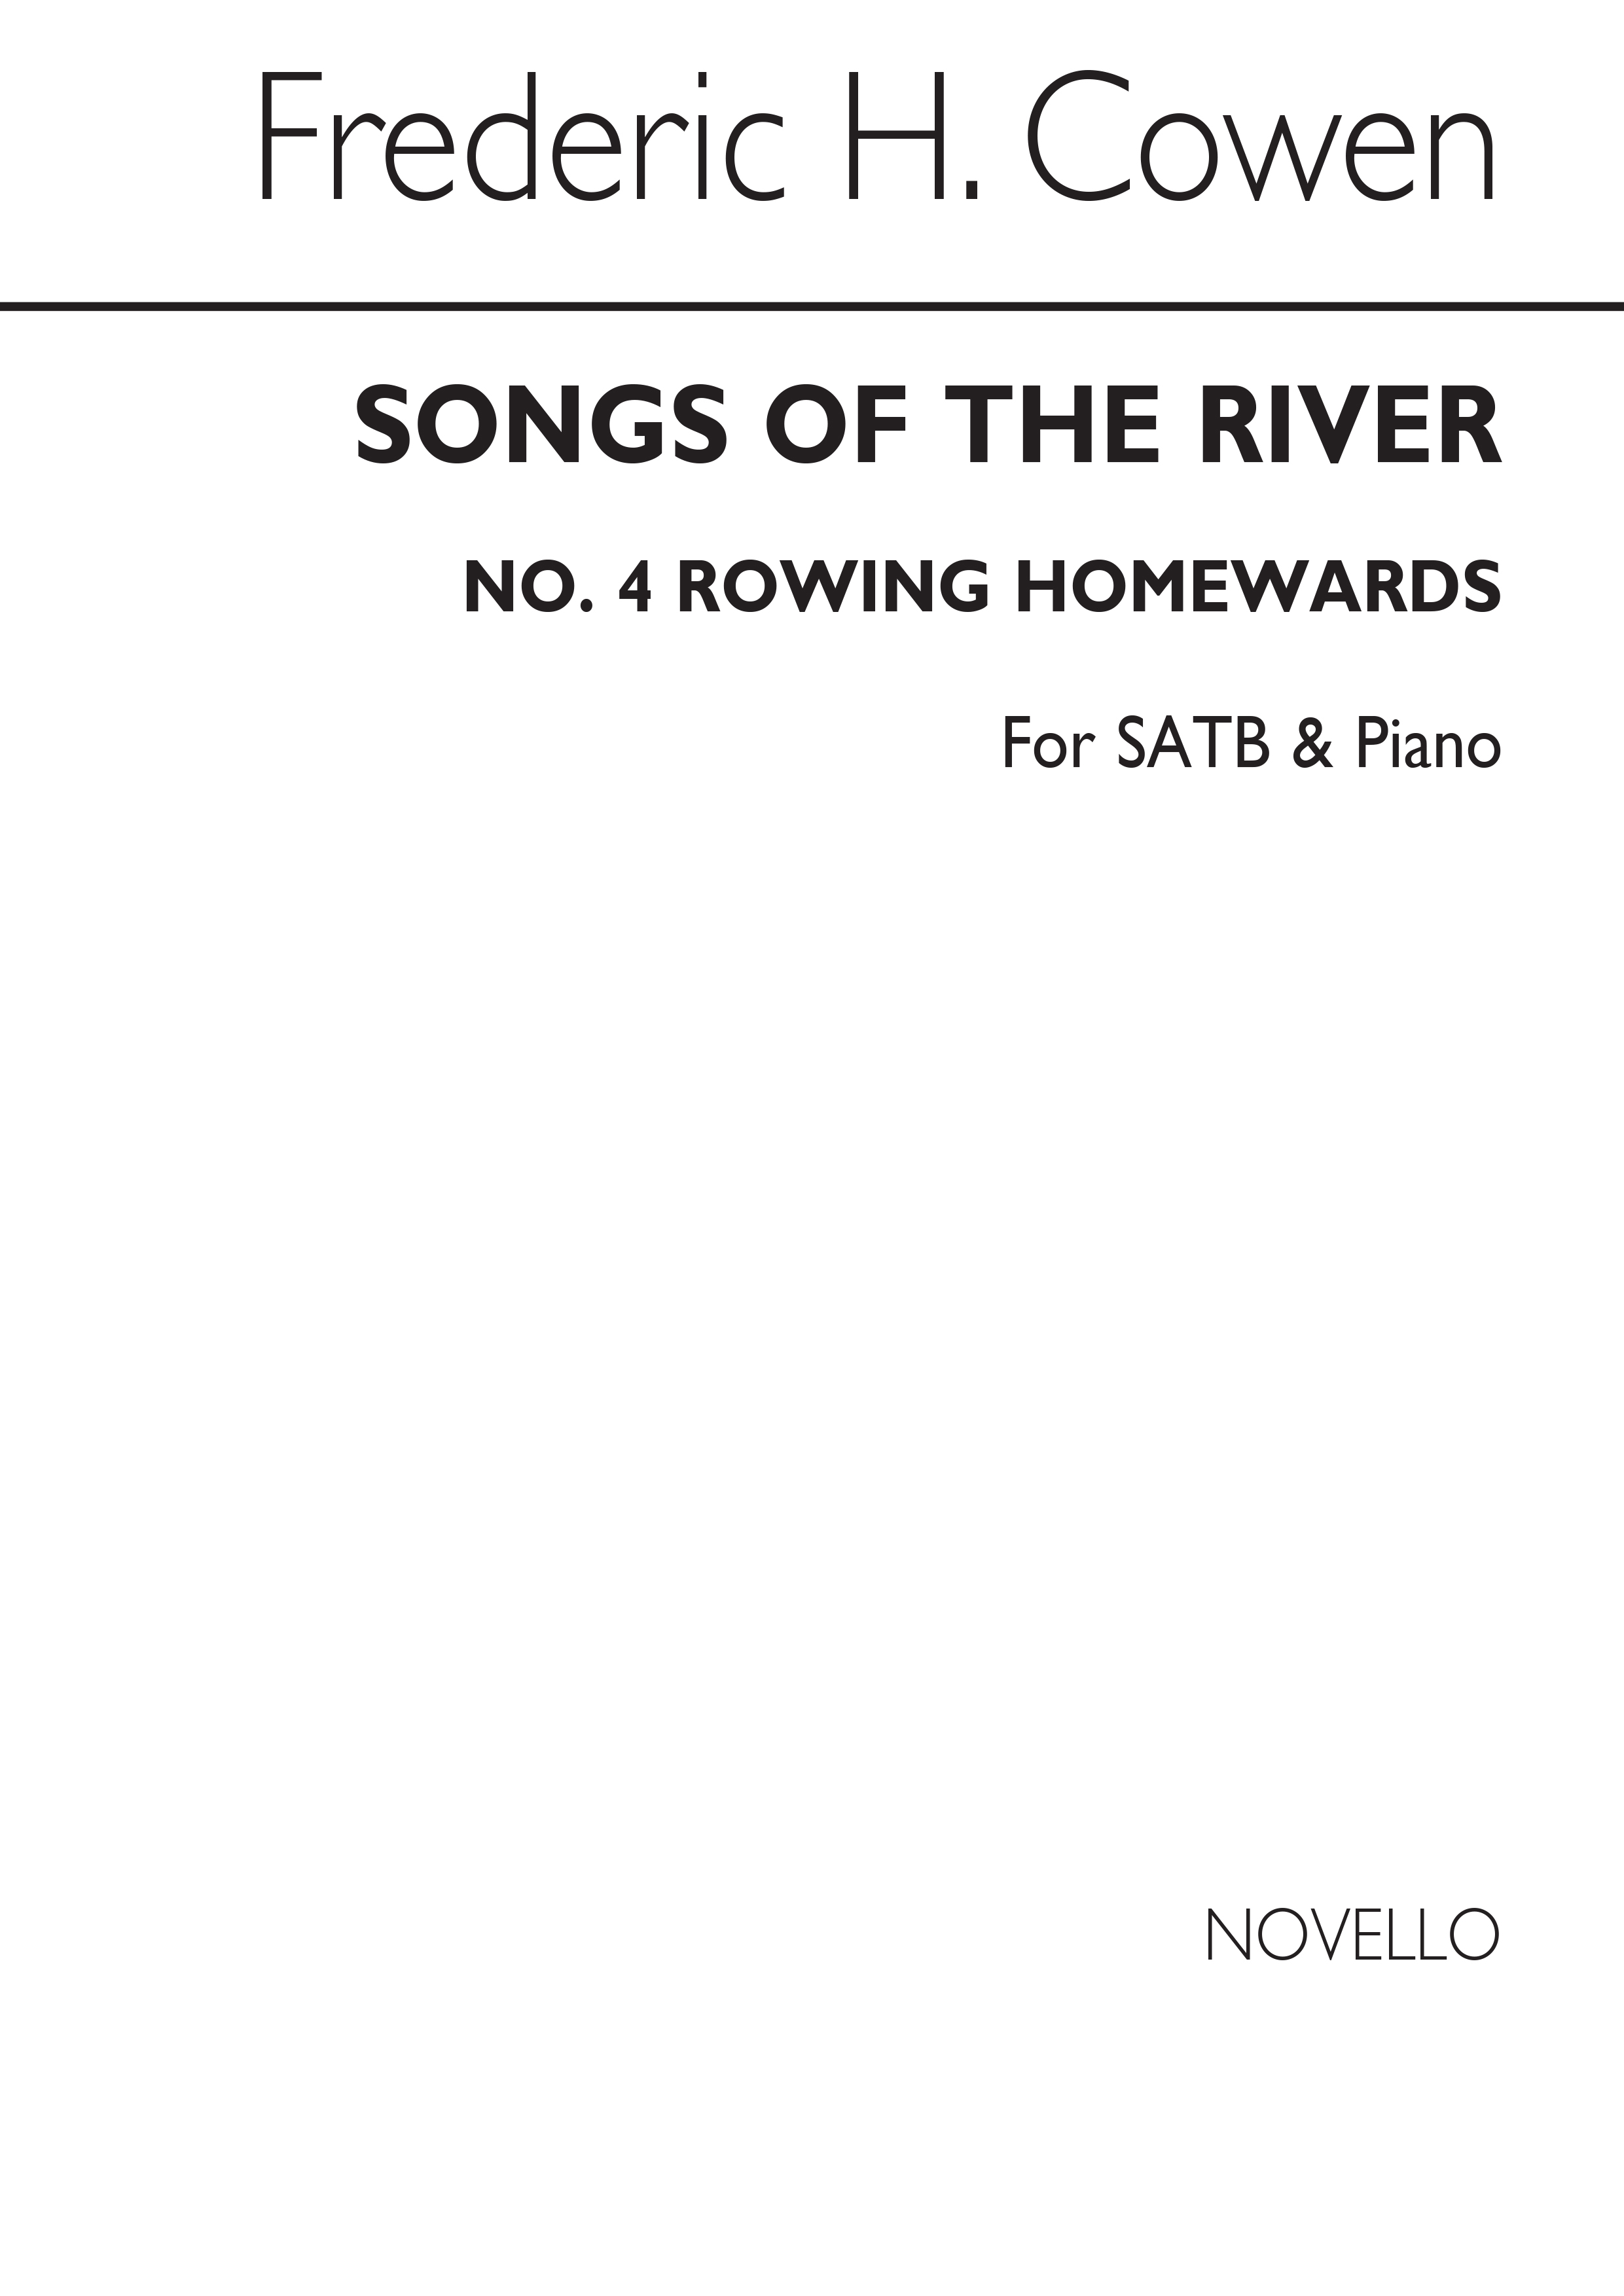 Frederic H. Cowen: Songs Of The River No.4 Rowing Homewards: SATB: Vocal Score